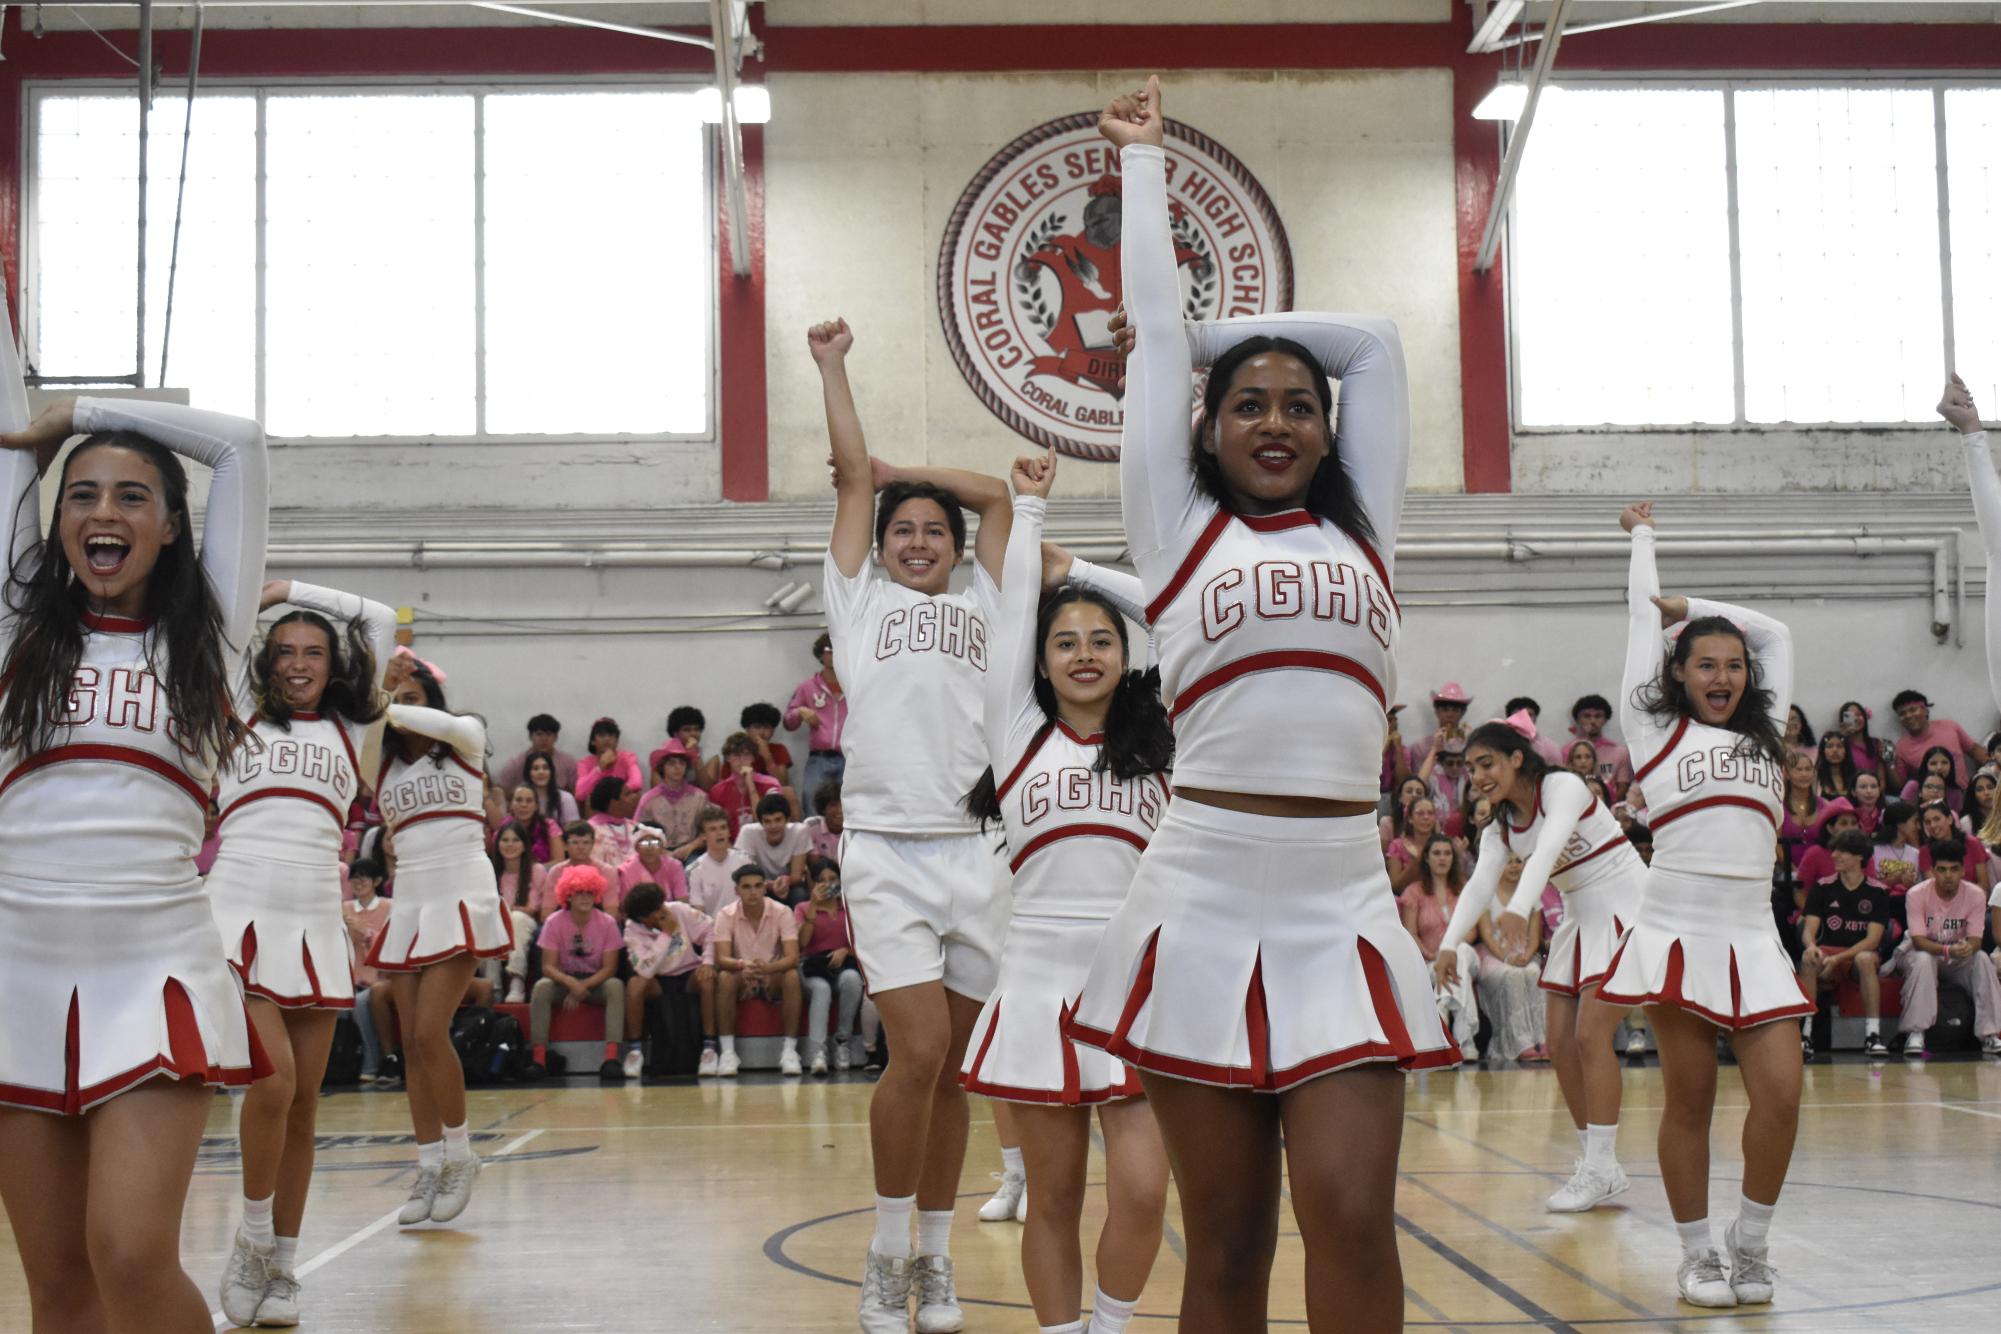 The cheerleaders had perfected their routines for this pep rally, which had the student body astonished with their abilities.